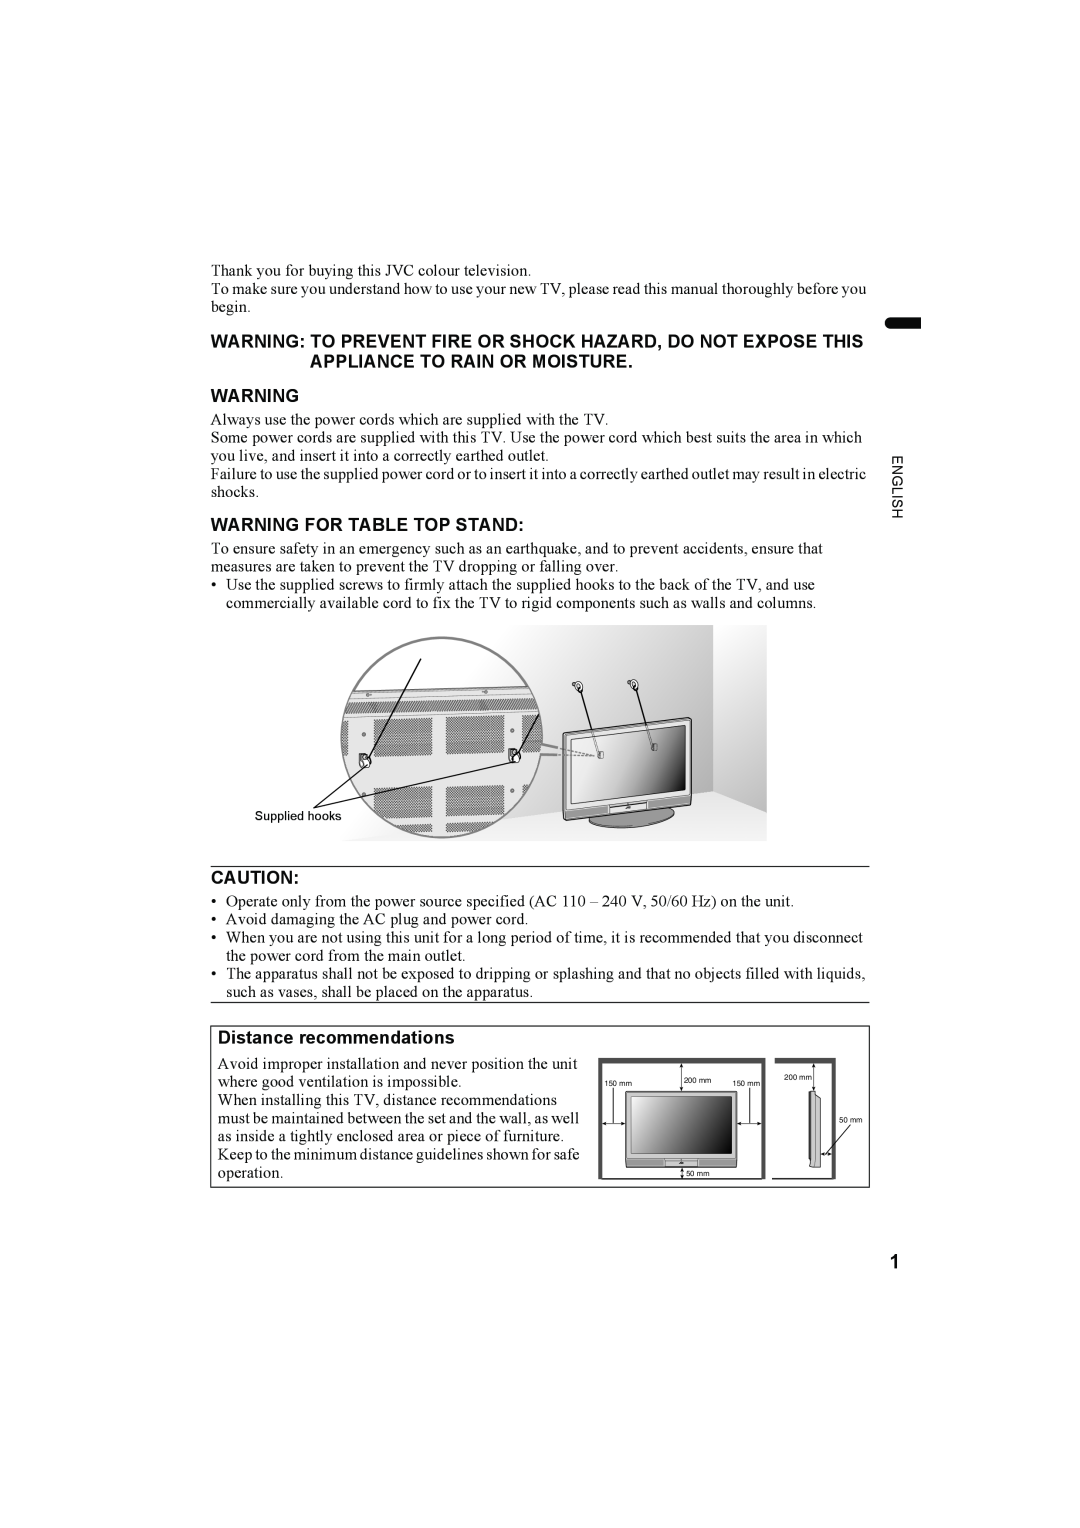 JVC LCT1774-001A, 1004MKH-CR-VP manual Warning For Table Top Stand, Distance recommendations 